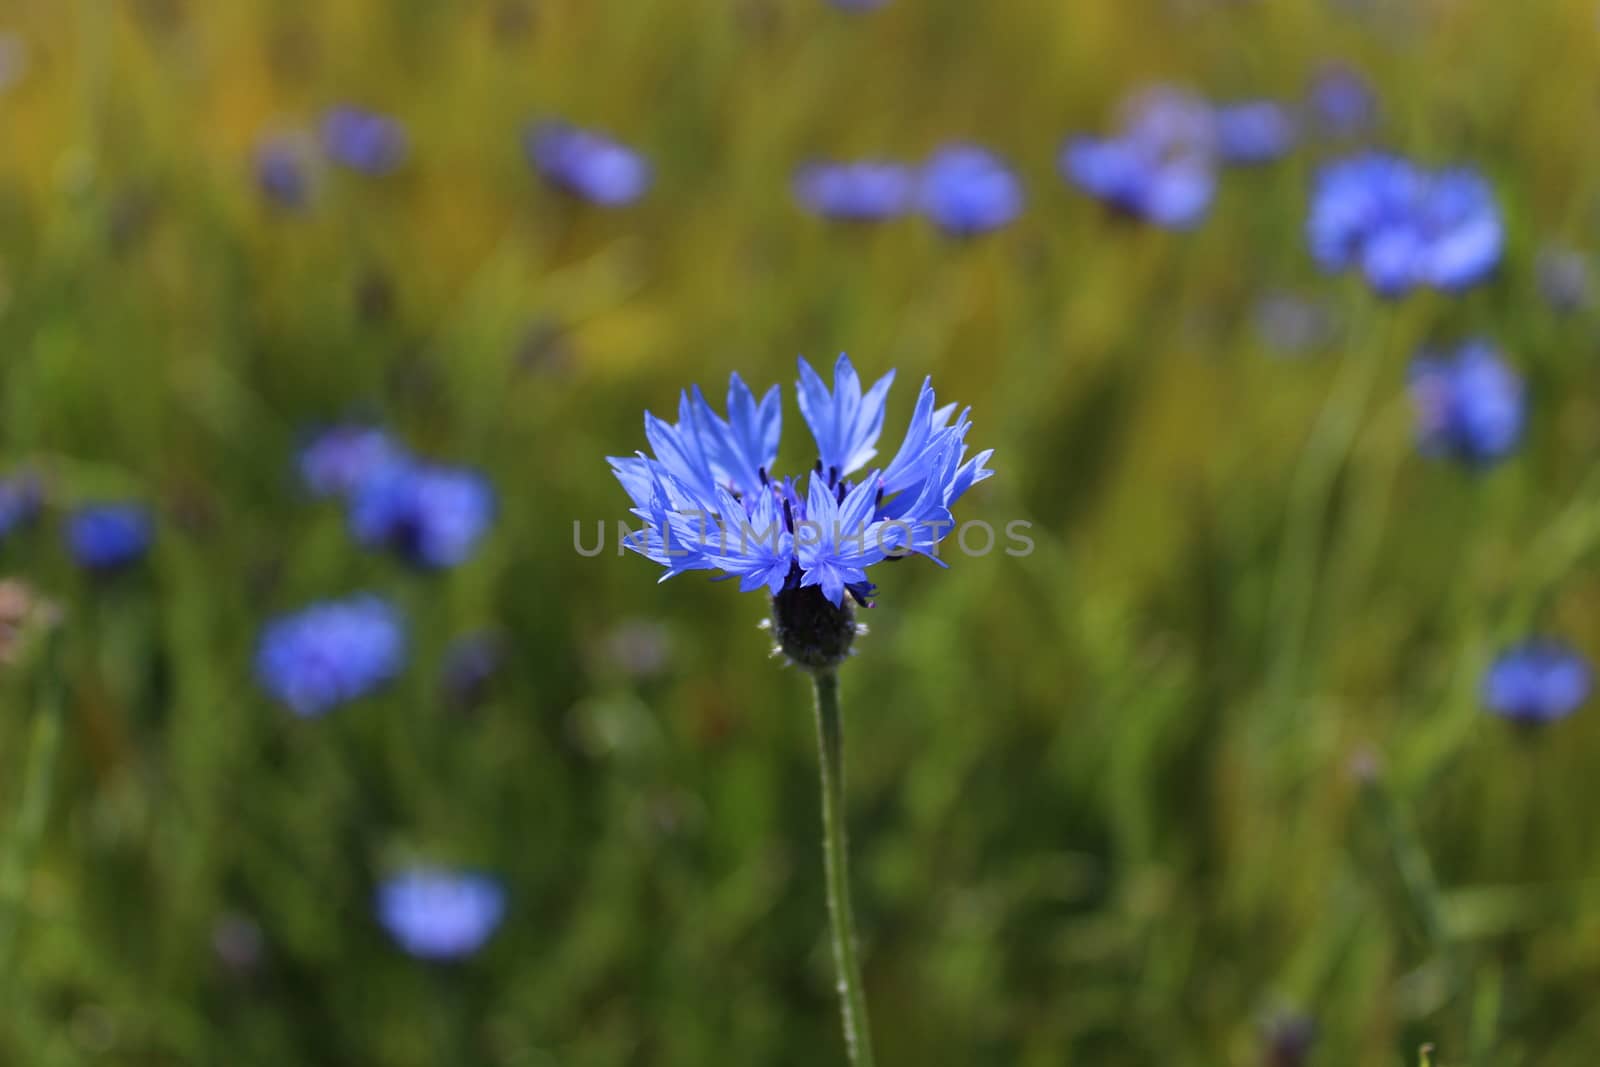 The picture shows a cornflower in a wheat field